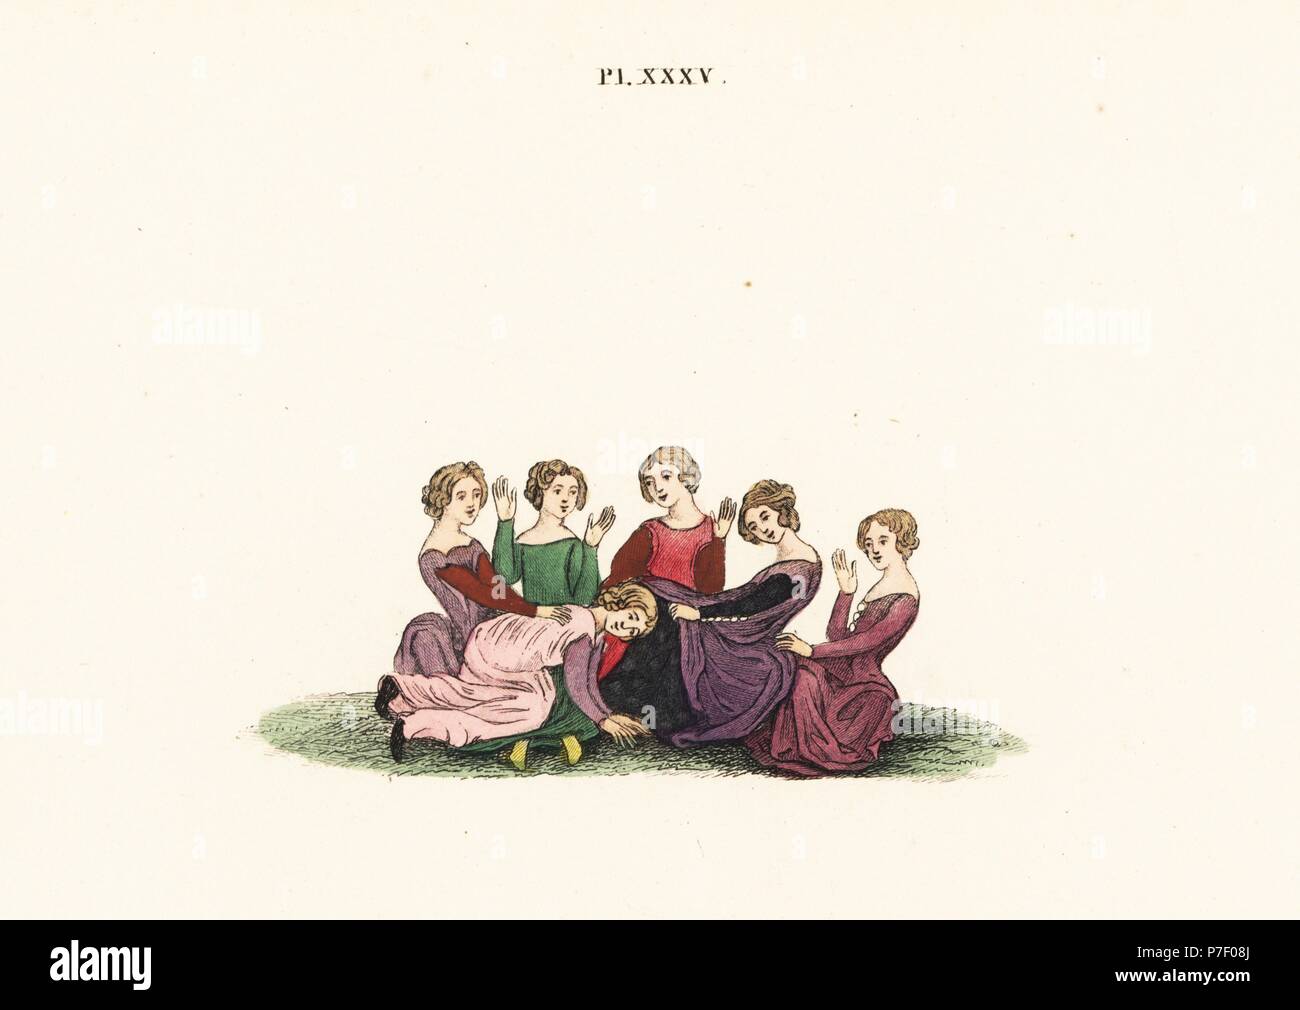 Women playing hot-cockles, where the kneeling girl must guess whose hand is  upon her, 14th